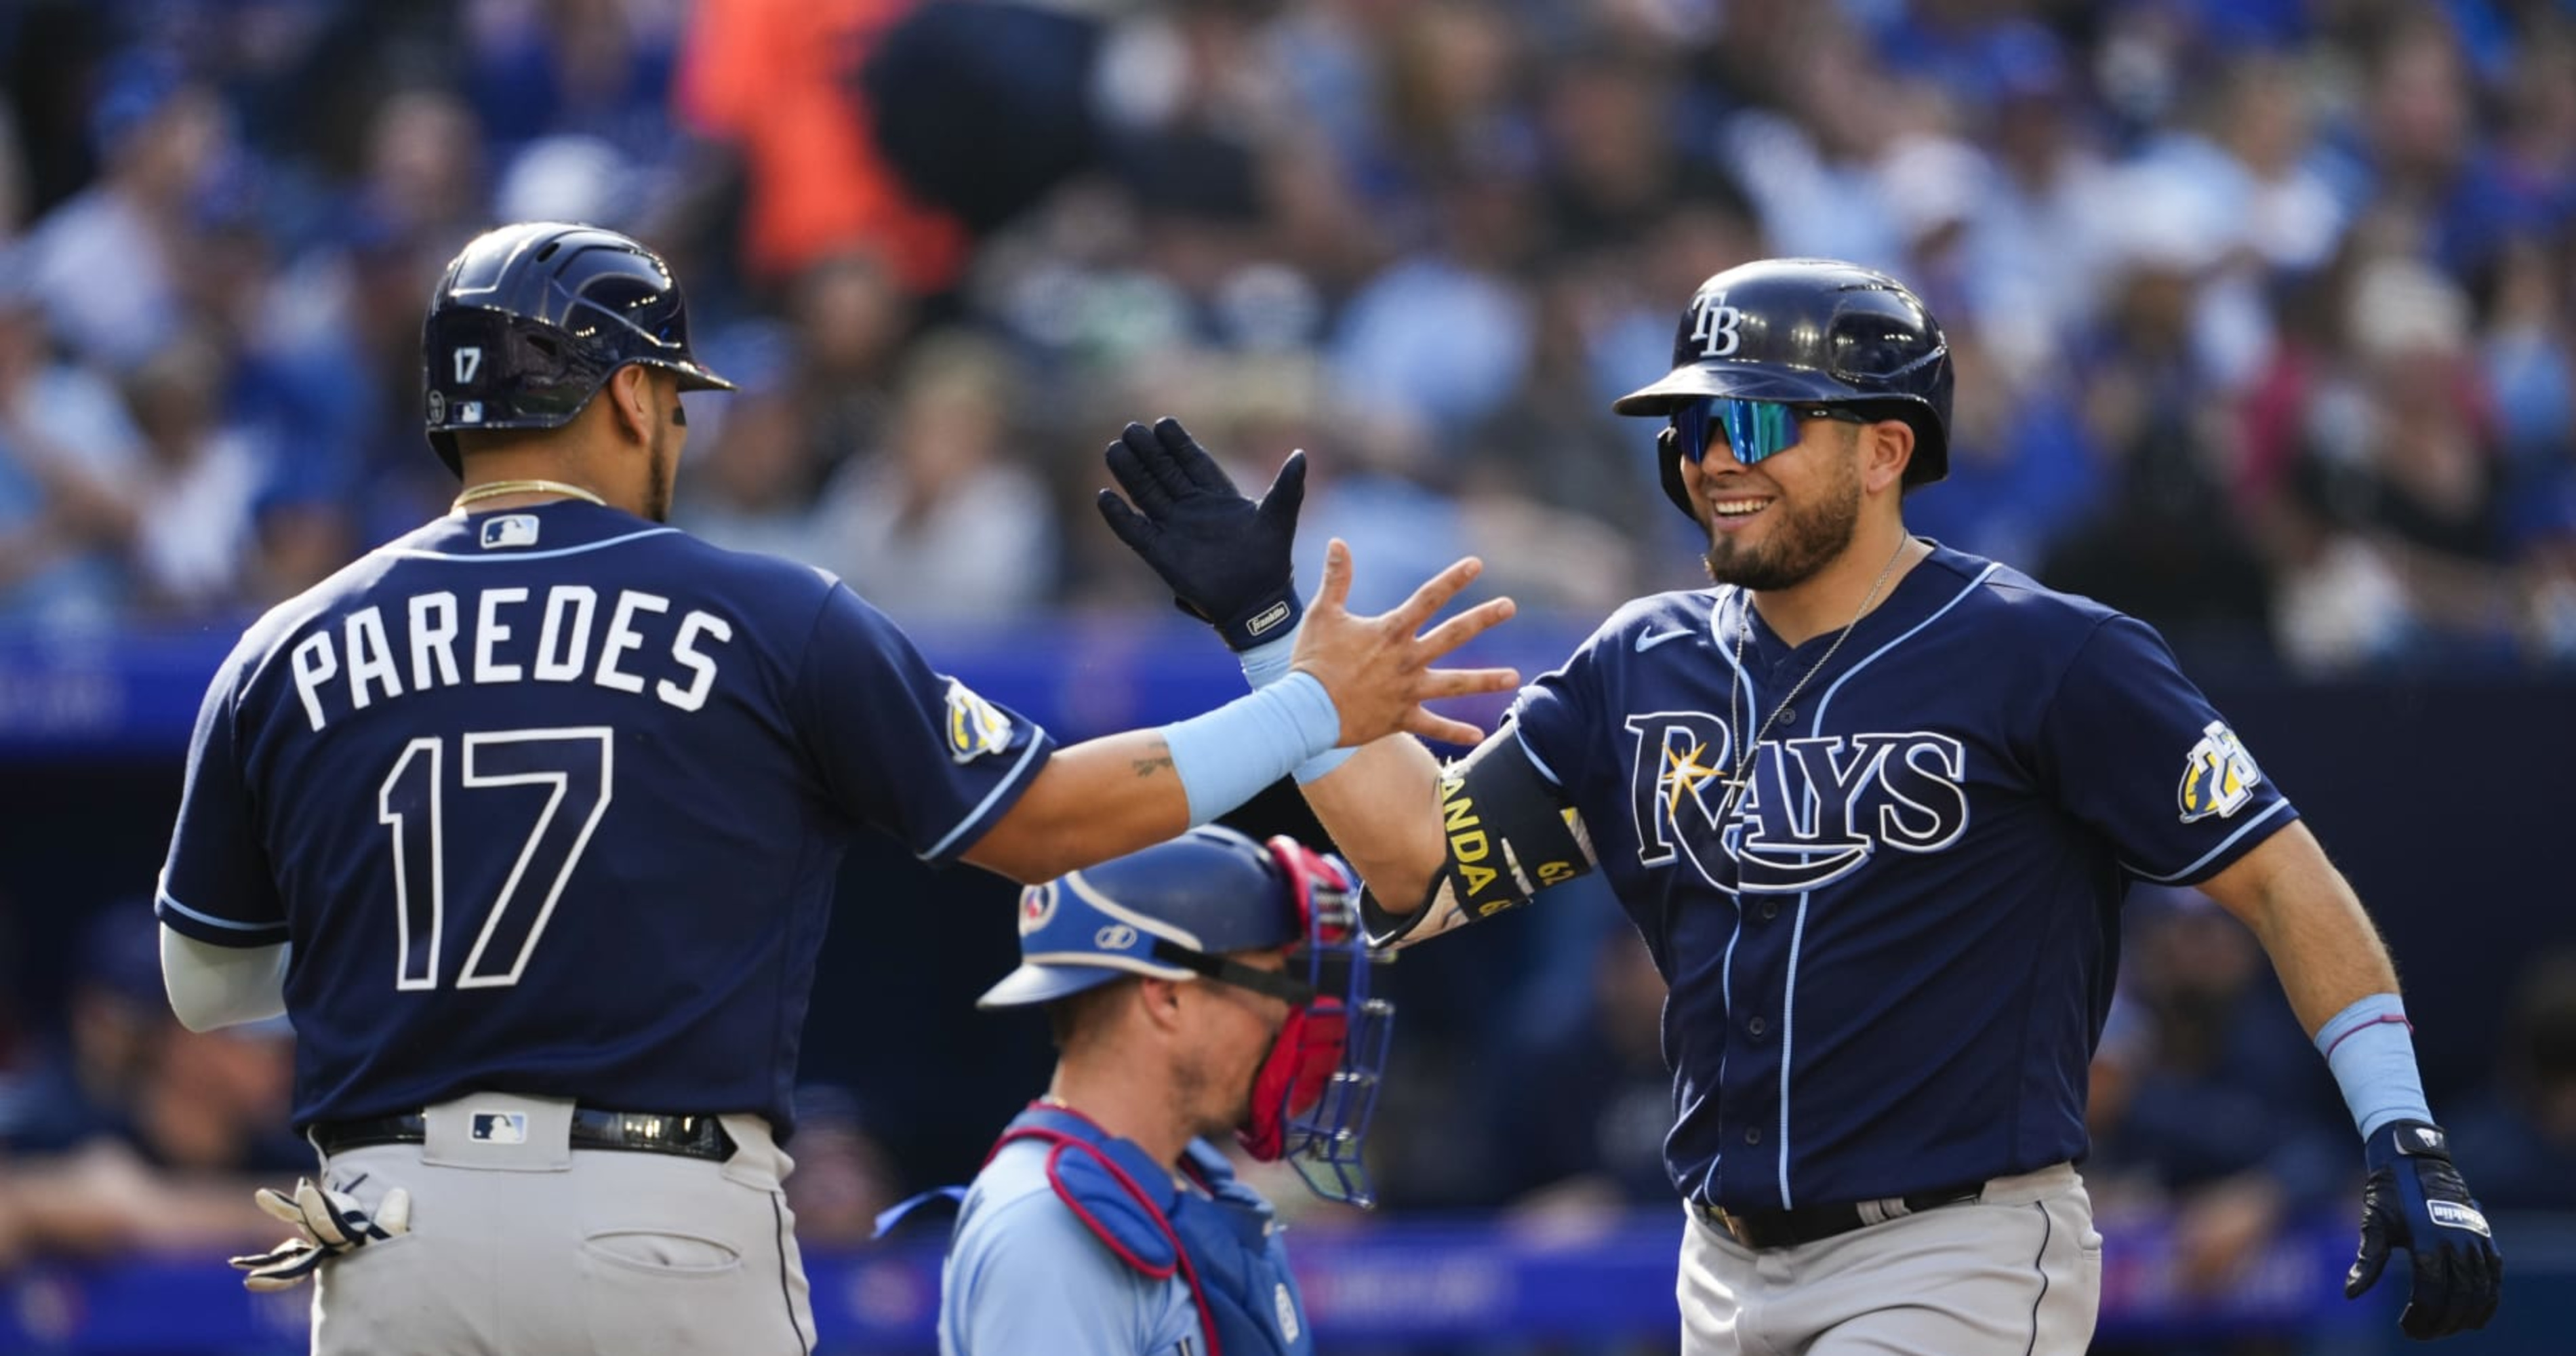 FOX Sports: MLB on X: The Rays announced they will wear their